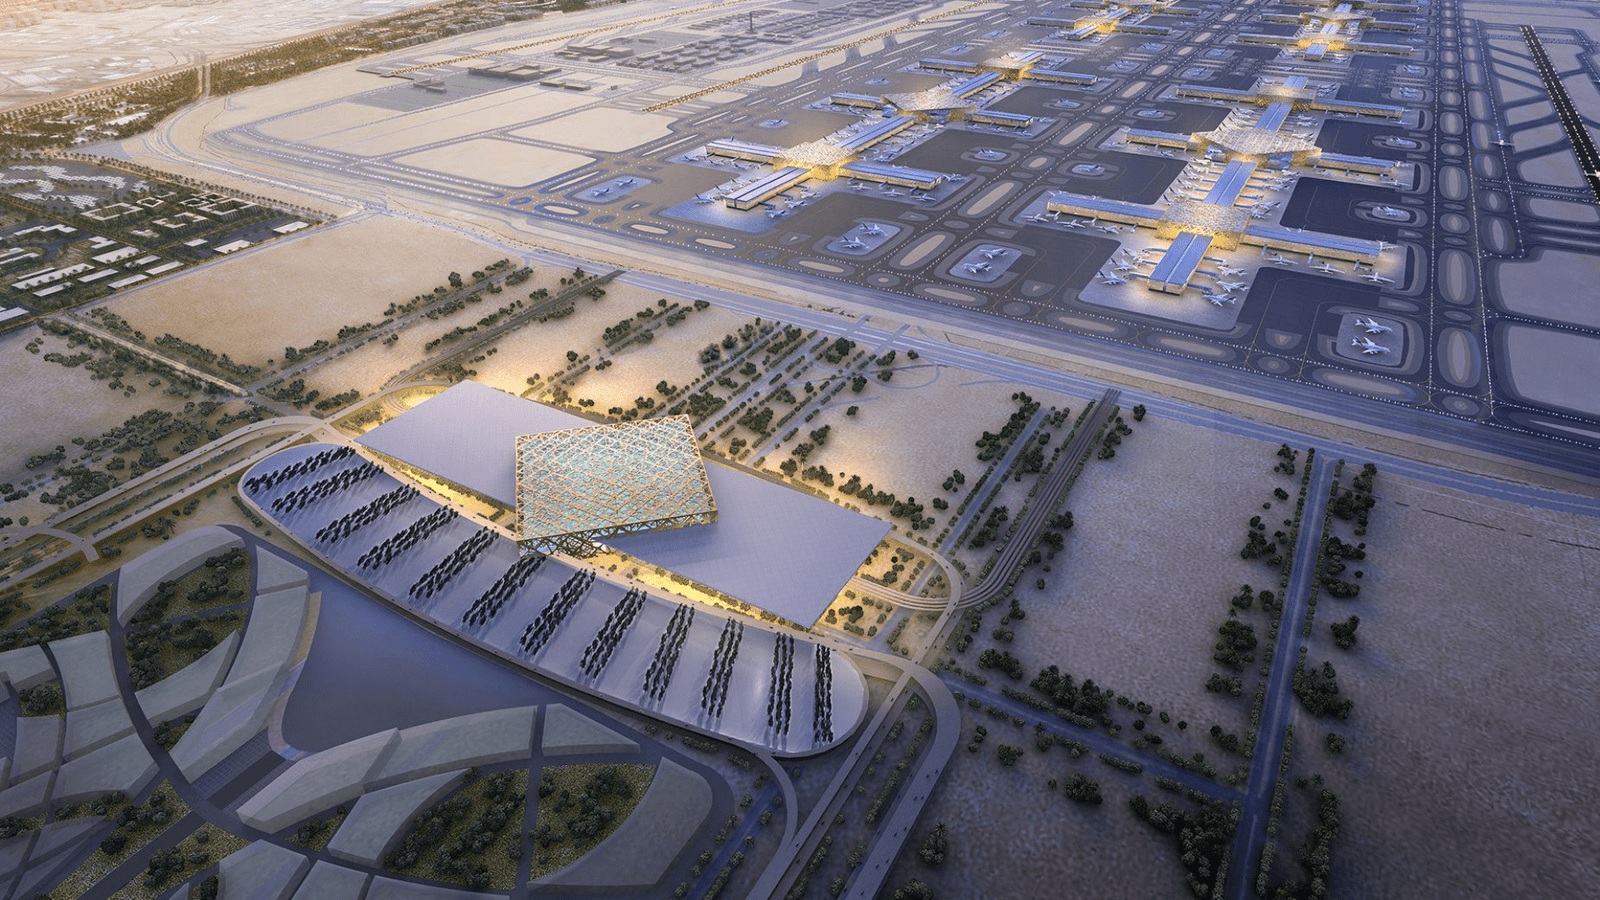 Dubai’s mega airport expansion to create world’s largest by 2050